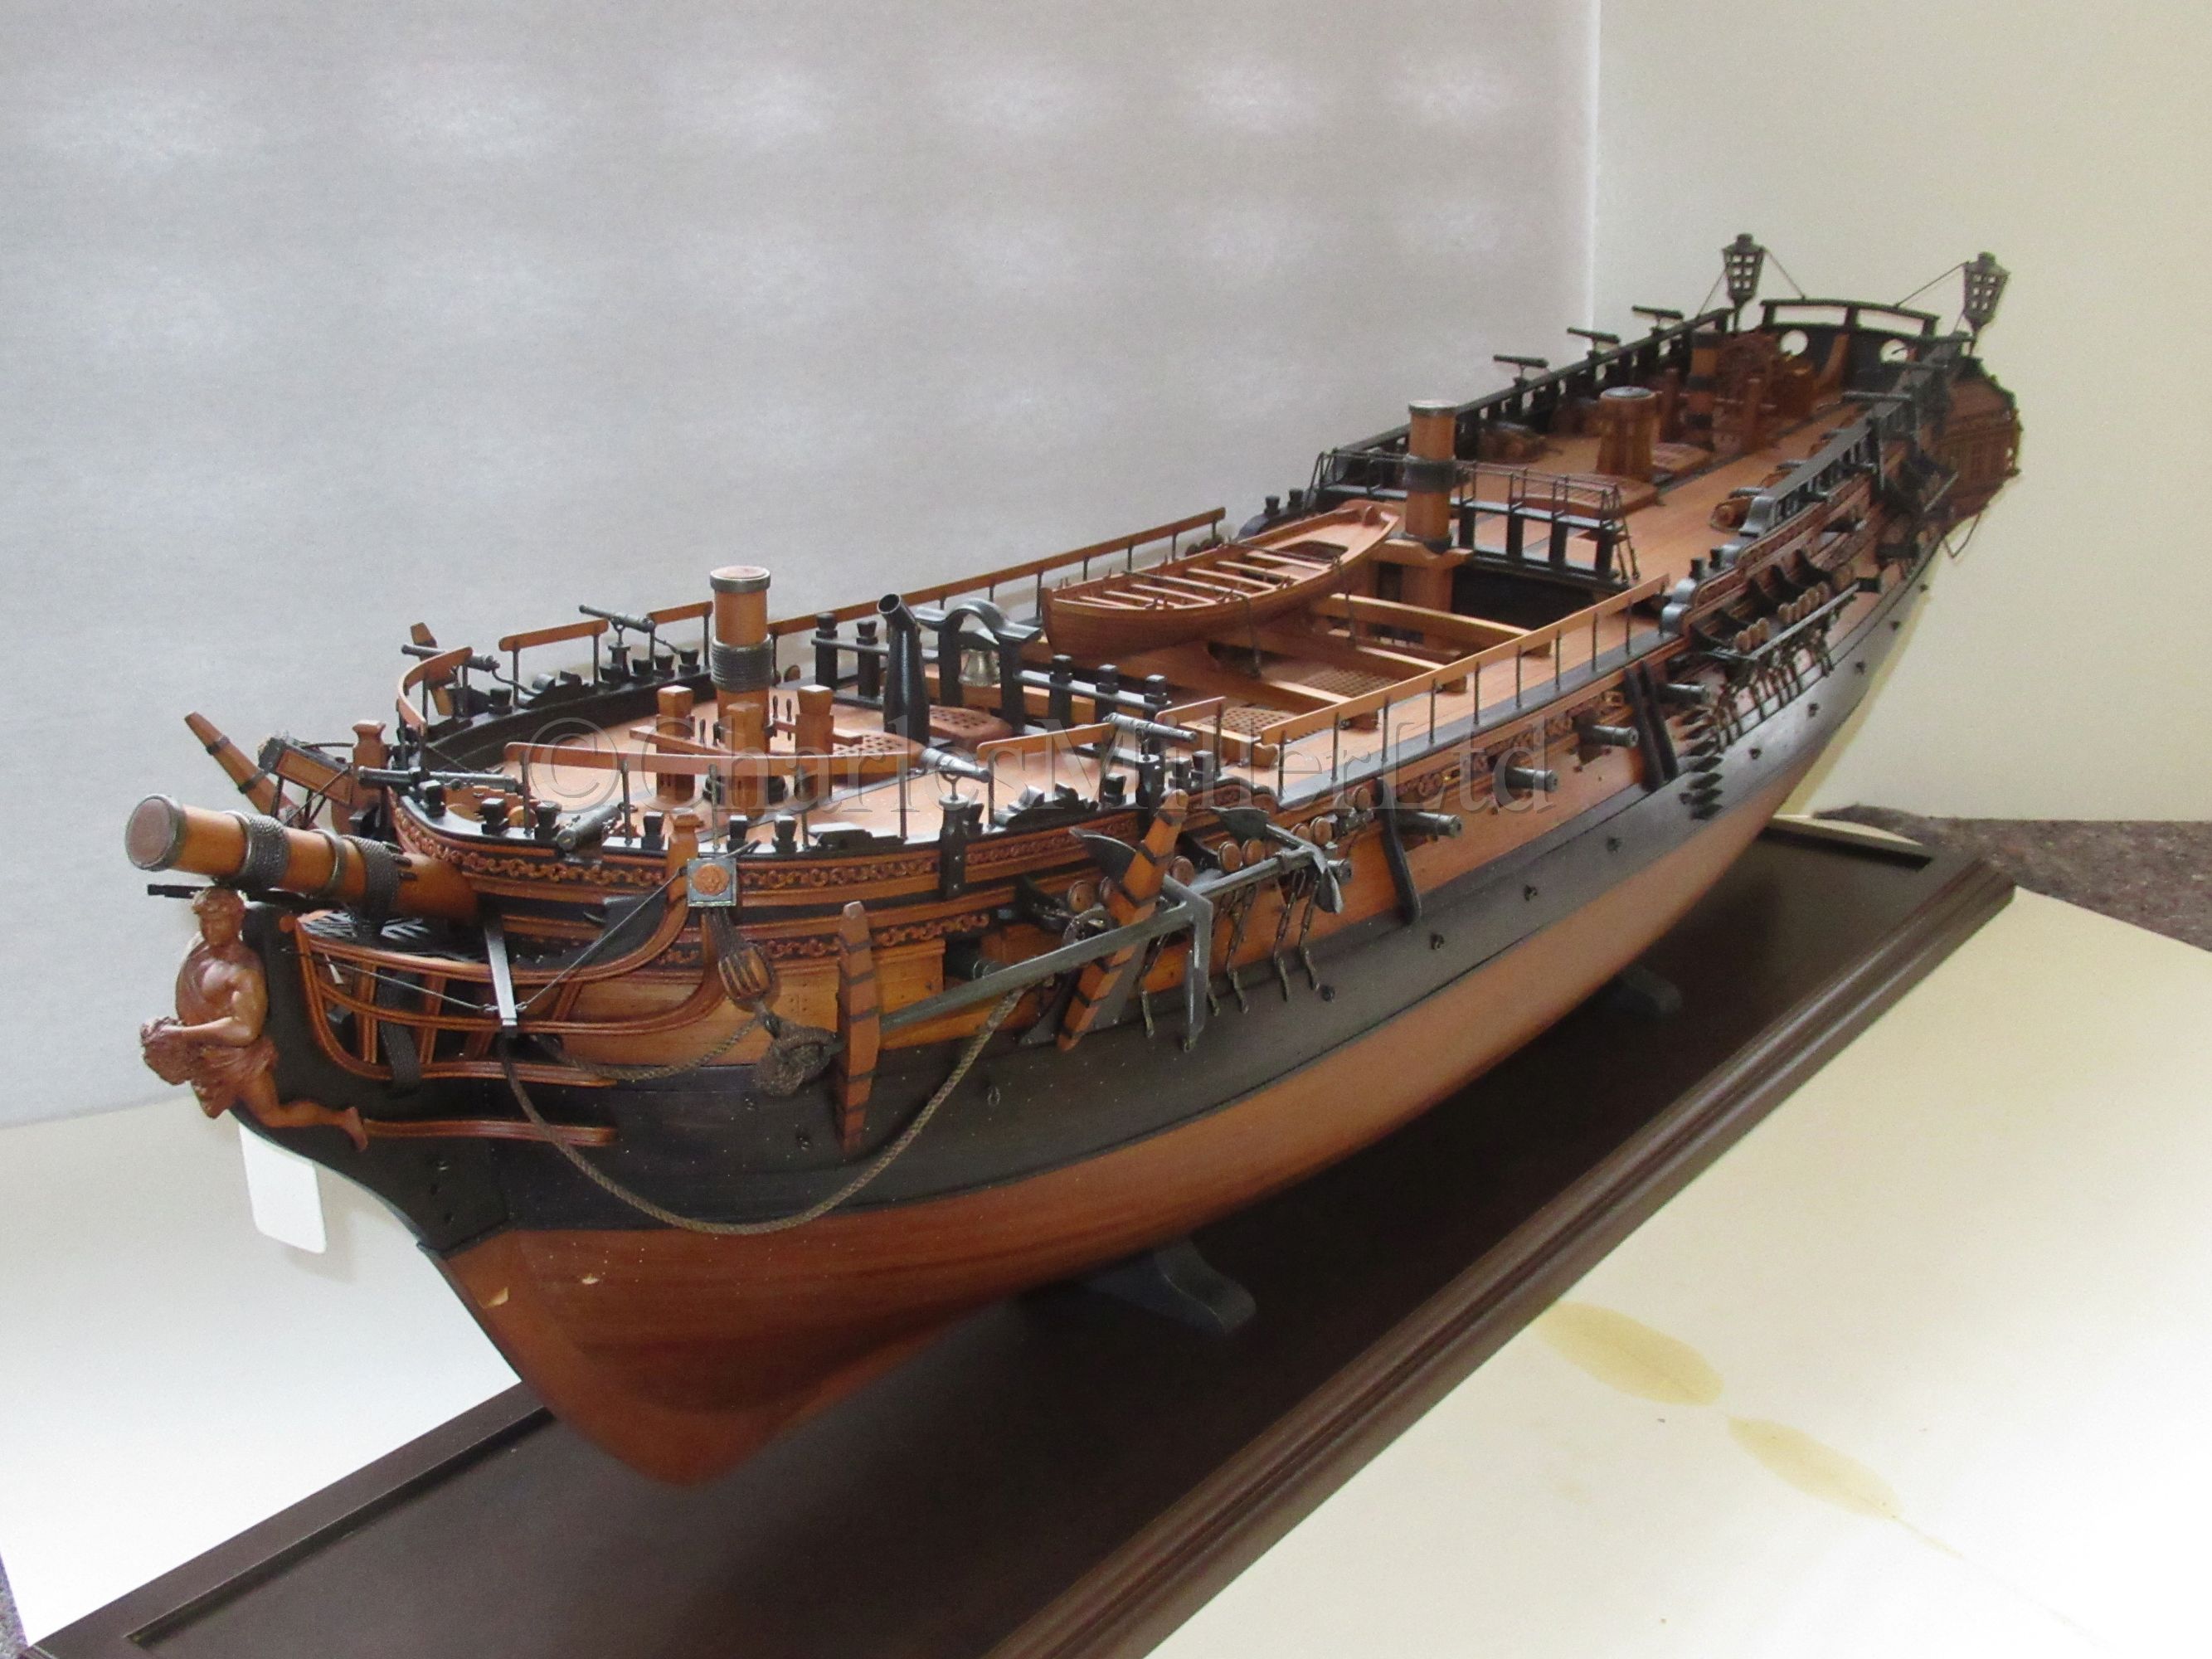 A VERY FINE 1:36 SCALE ADMIRALTY BOARD STYLE MODEL FOR THE SIXTH RATE 28 GUNS SHIP ENTERPRISE - Image 23 of 25